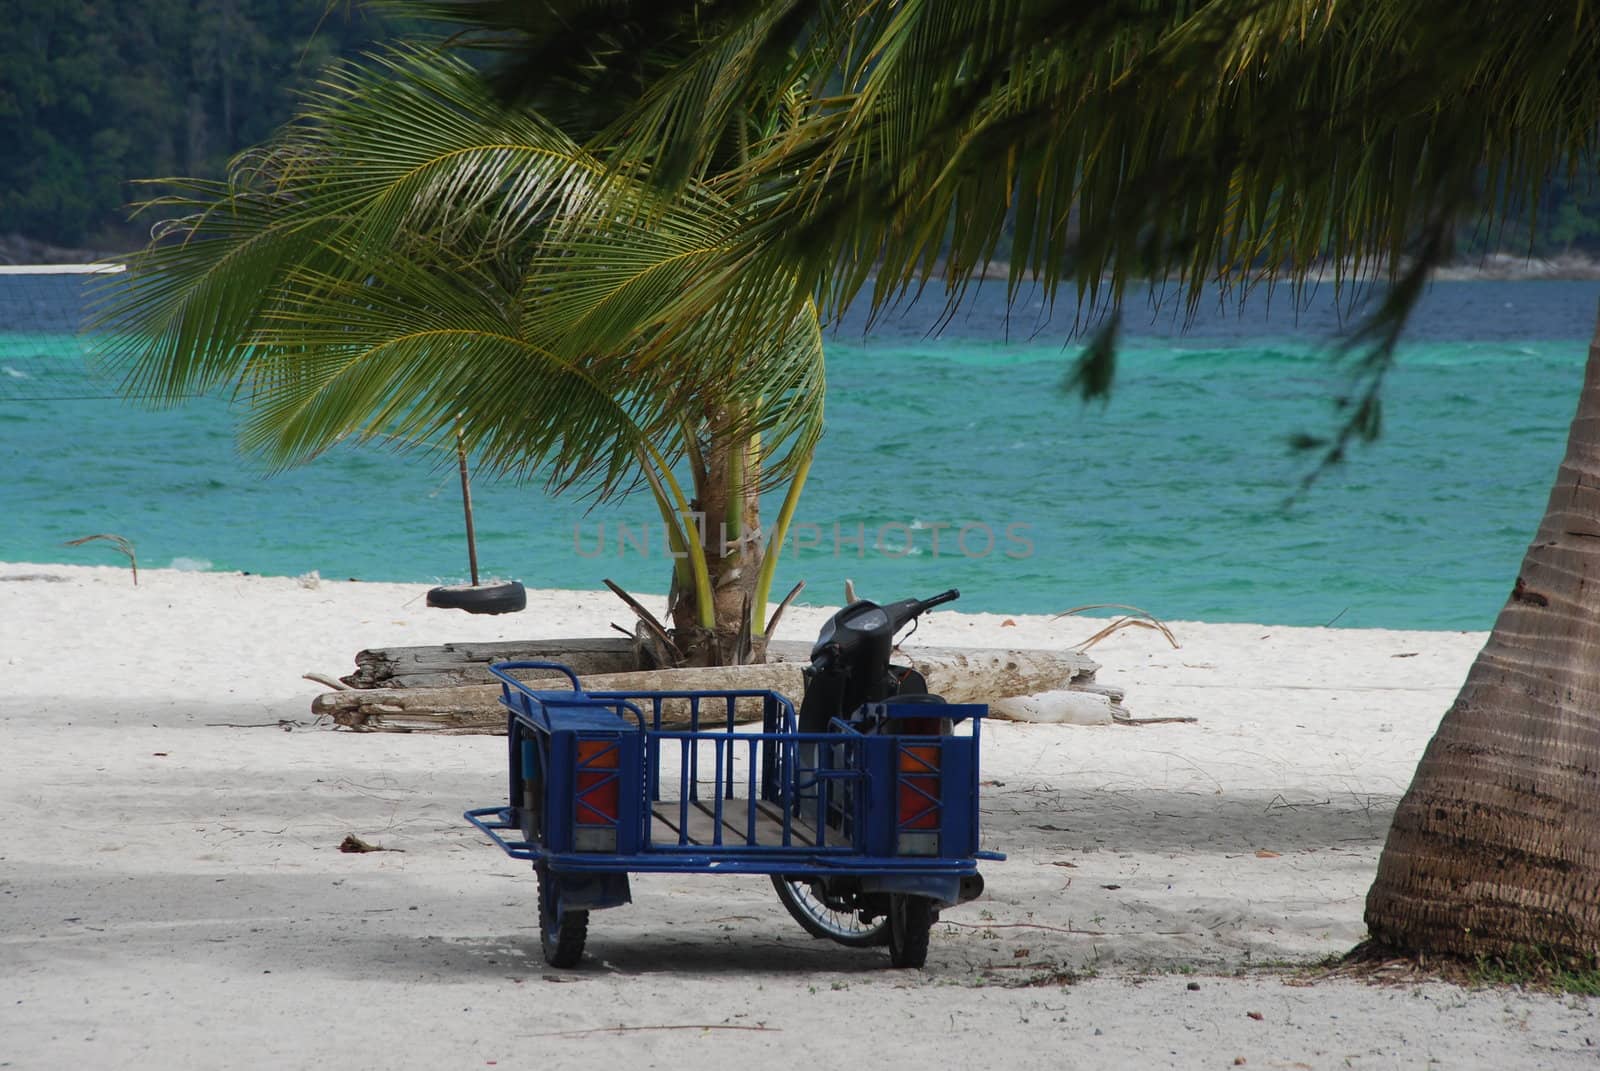 Motorcycle and cart on a tropical beach